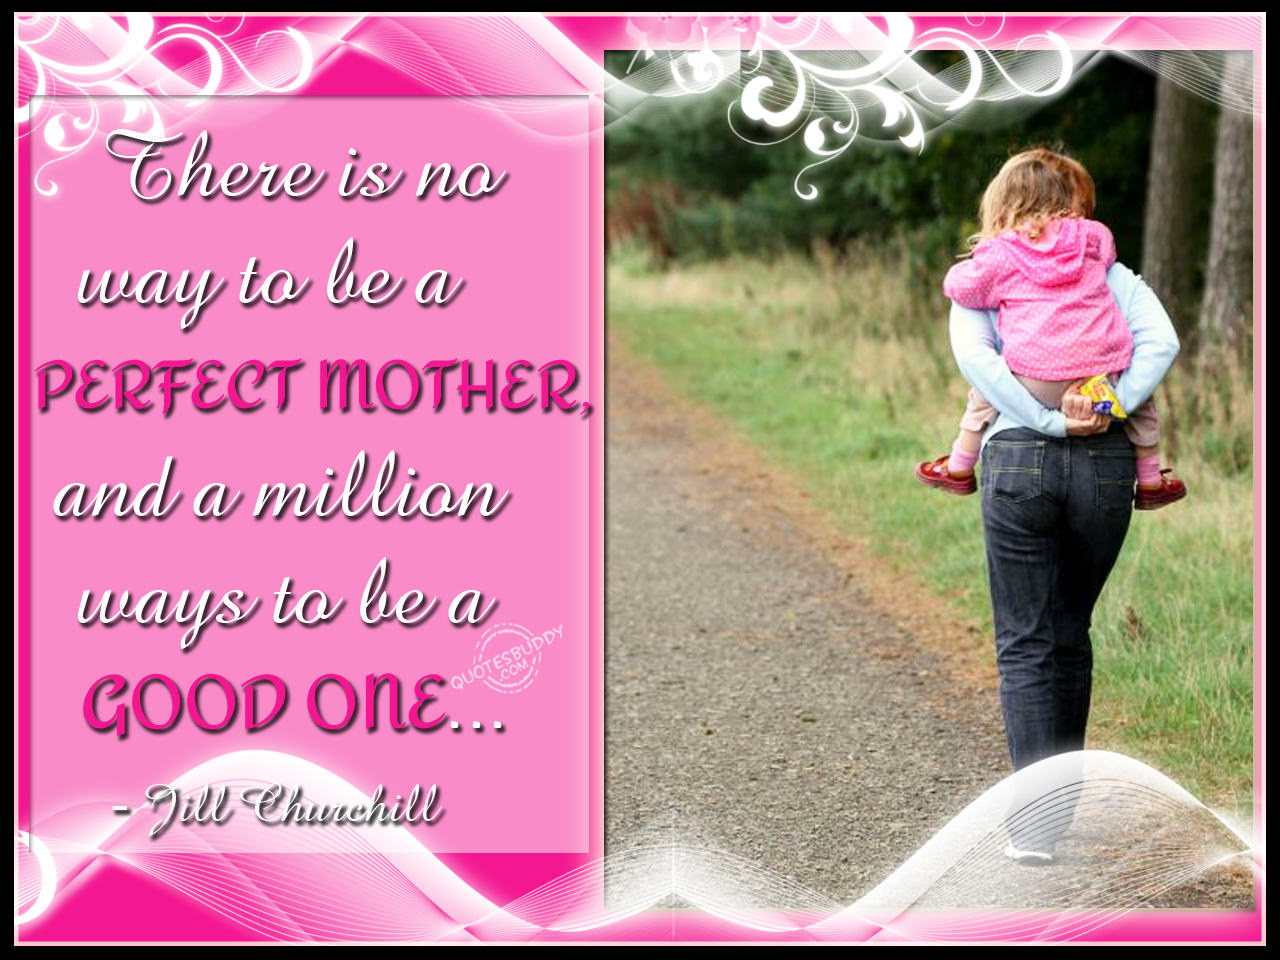 Daughter mothers перевод. Good mother. Счастливая мама цитаты. Mom quotes. Mom and daughter Love quotes.